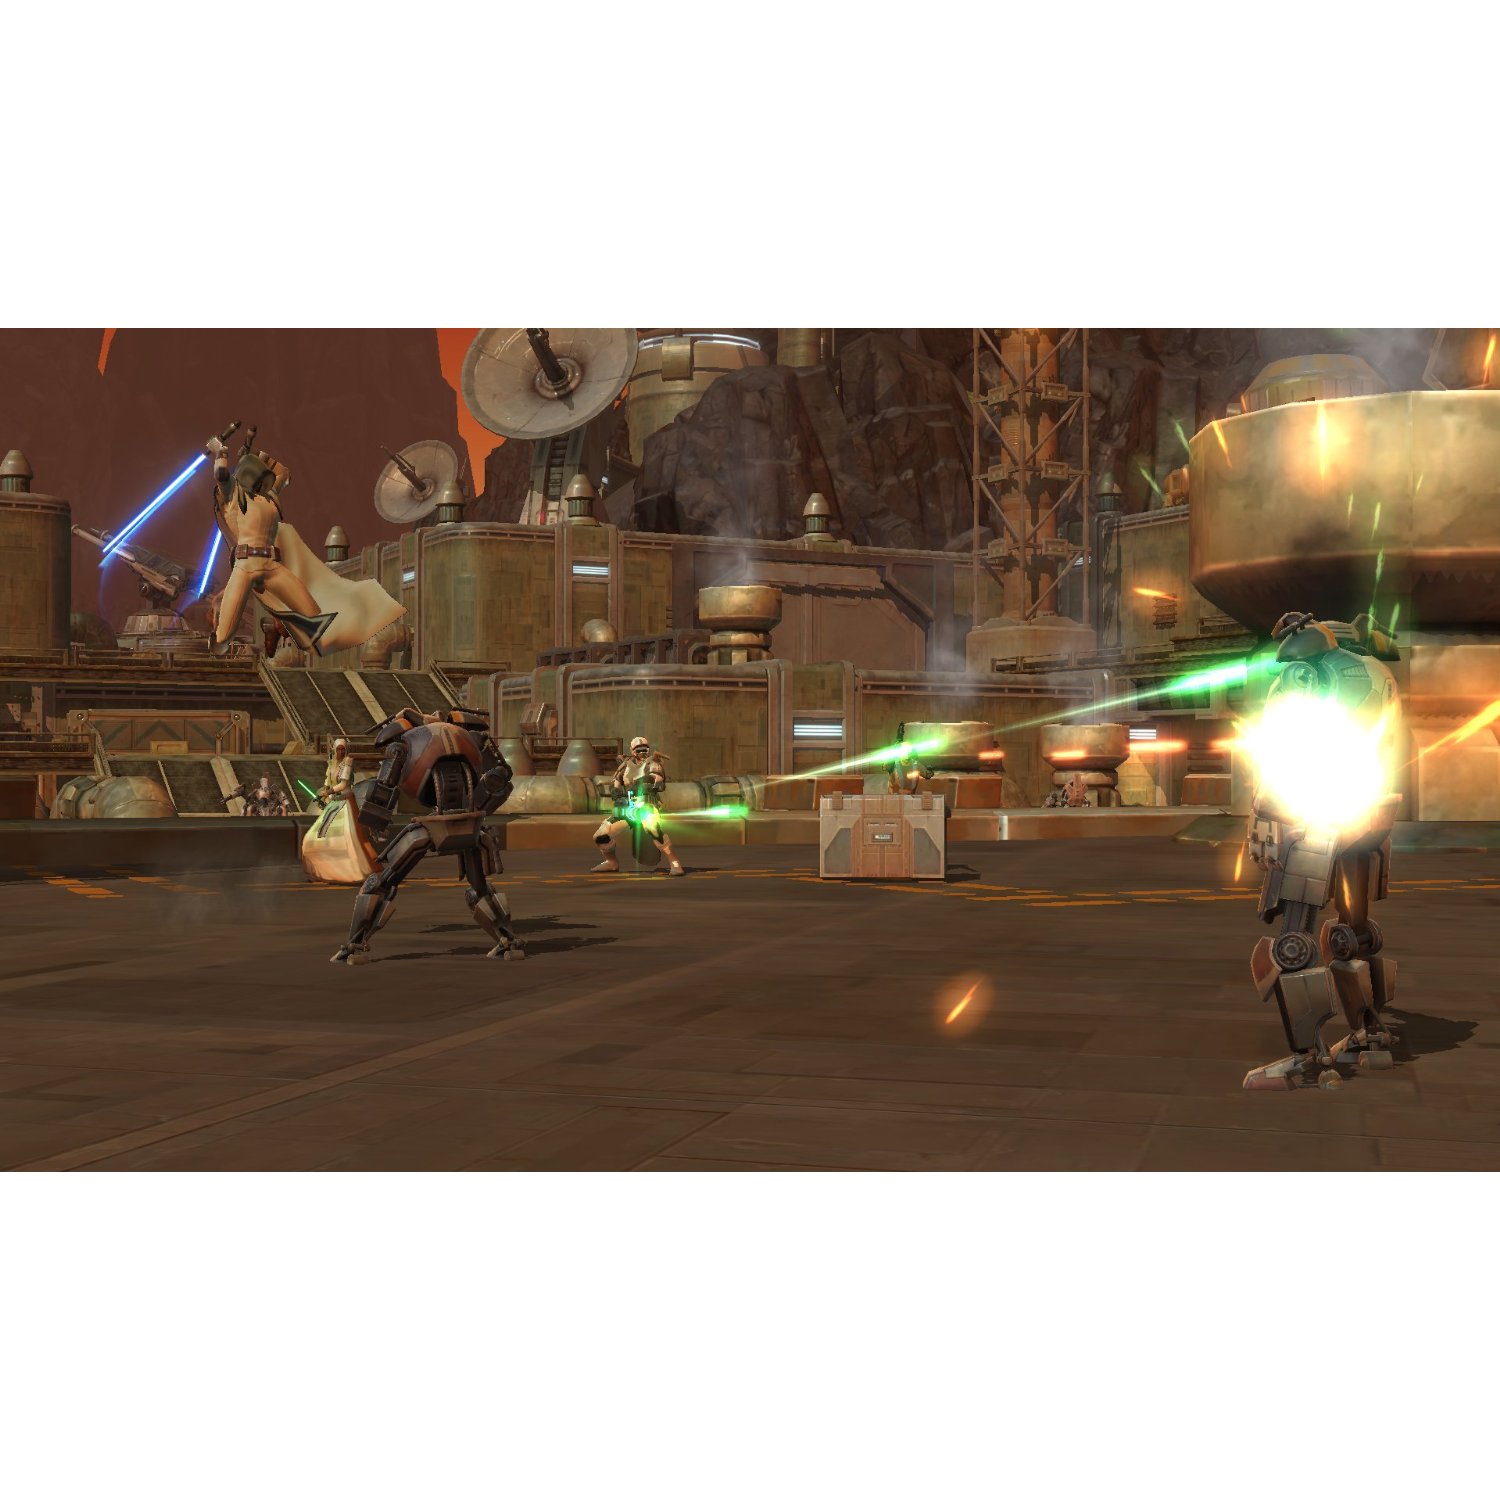 http://thetechjournal.com/wp-content/uploads/images/1107/1312112025-star-wars-the-old-republic--pc-game-available-for-preorder-now-6.jpg